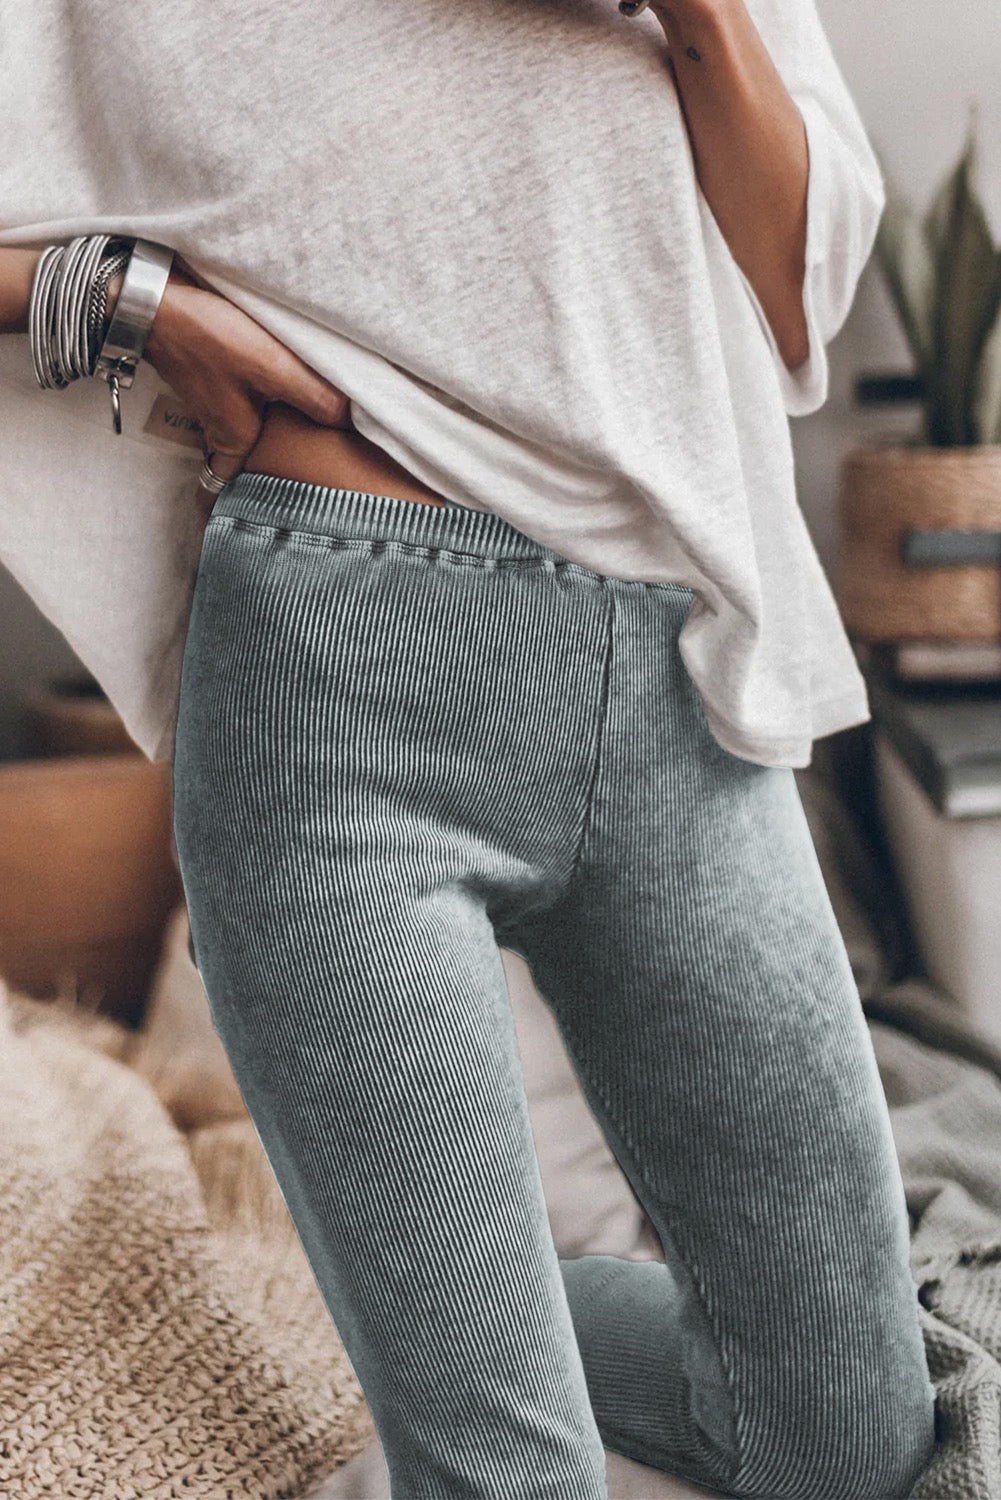 Aro Lora Beige Ribbed Knit Lounge Leggings For Women High Waist Cotton  Fitness Pants For Casual Autumn All Match Look 230816 From Qiyuan03, $12.33  | DHgate.Com